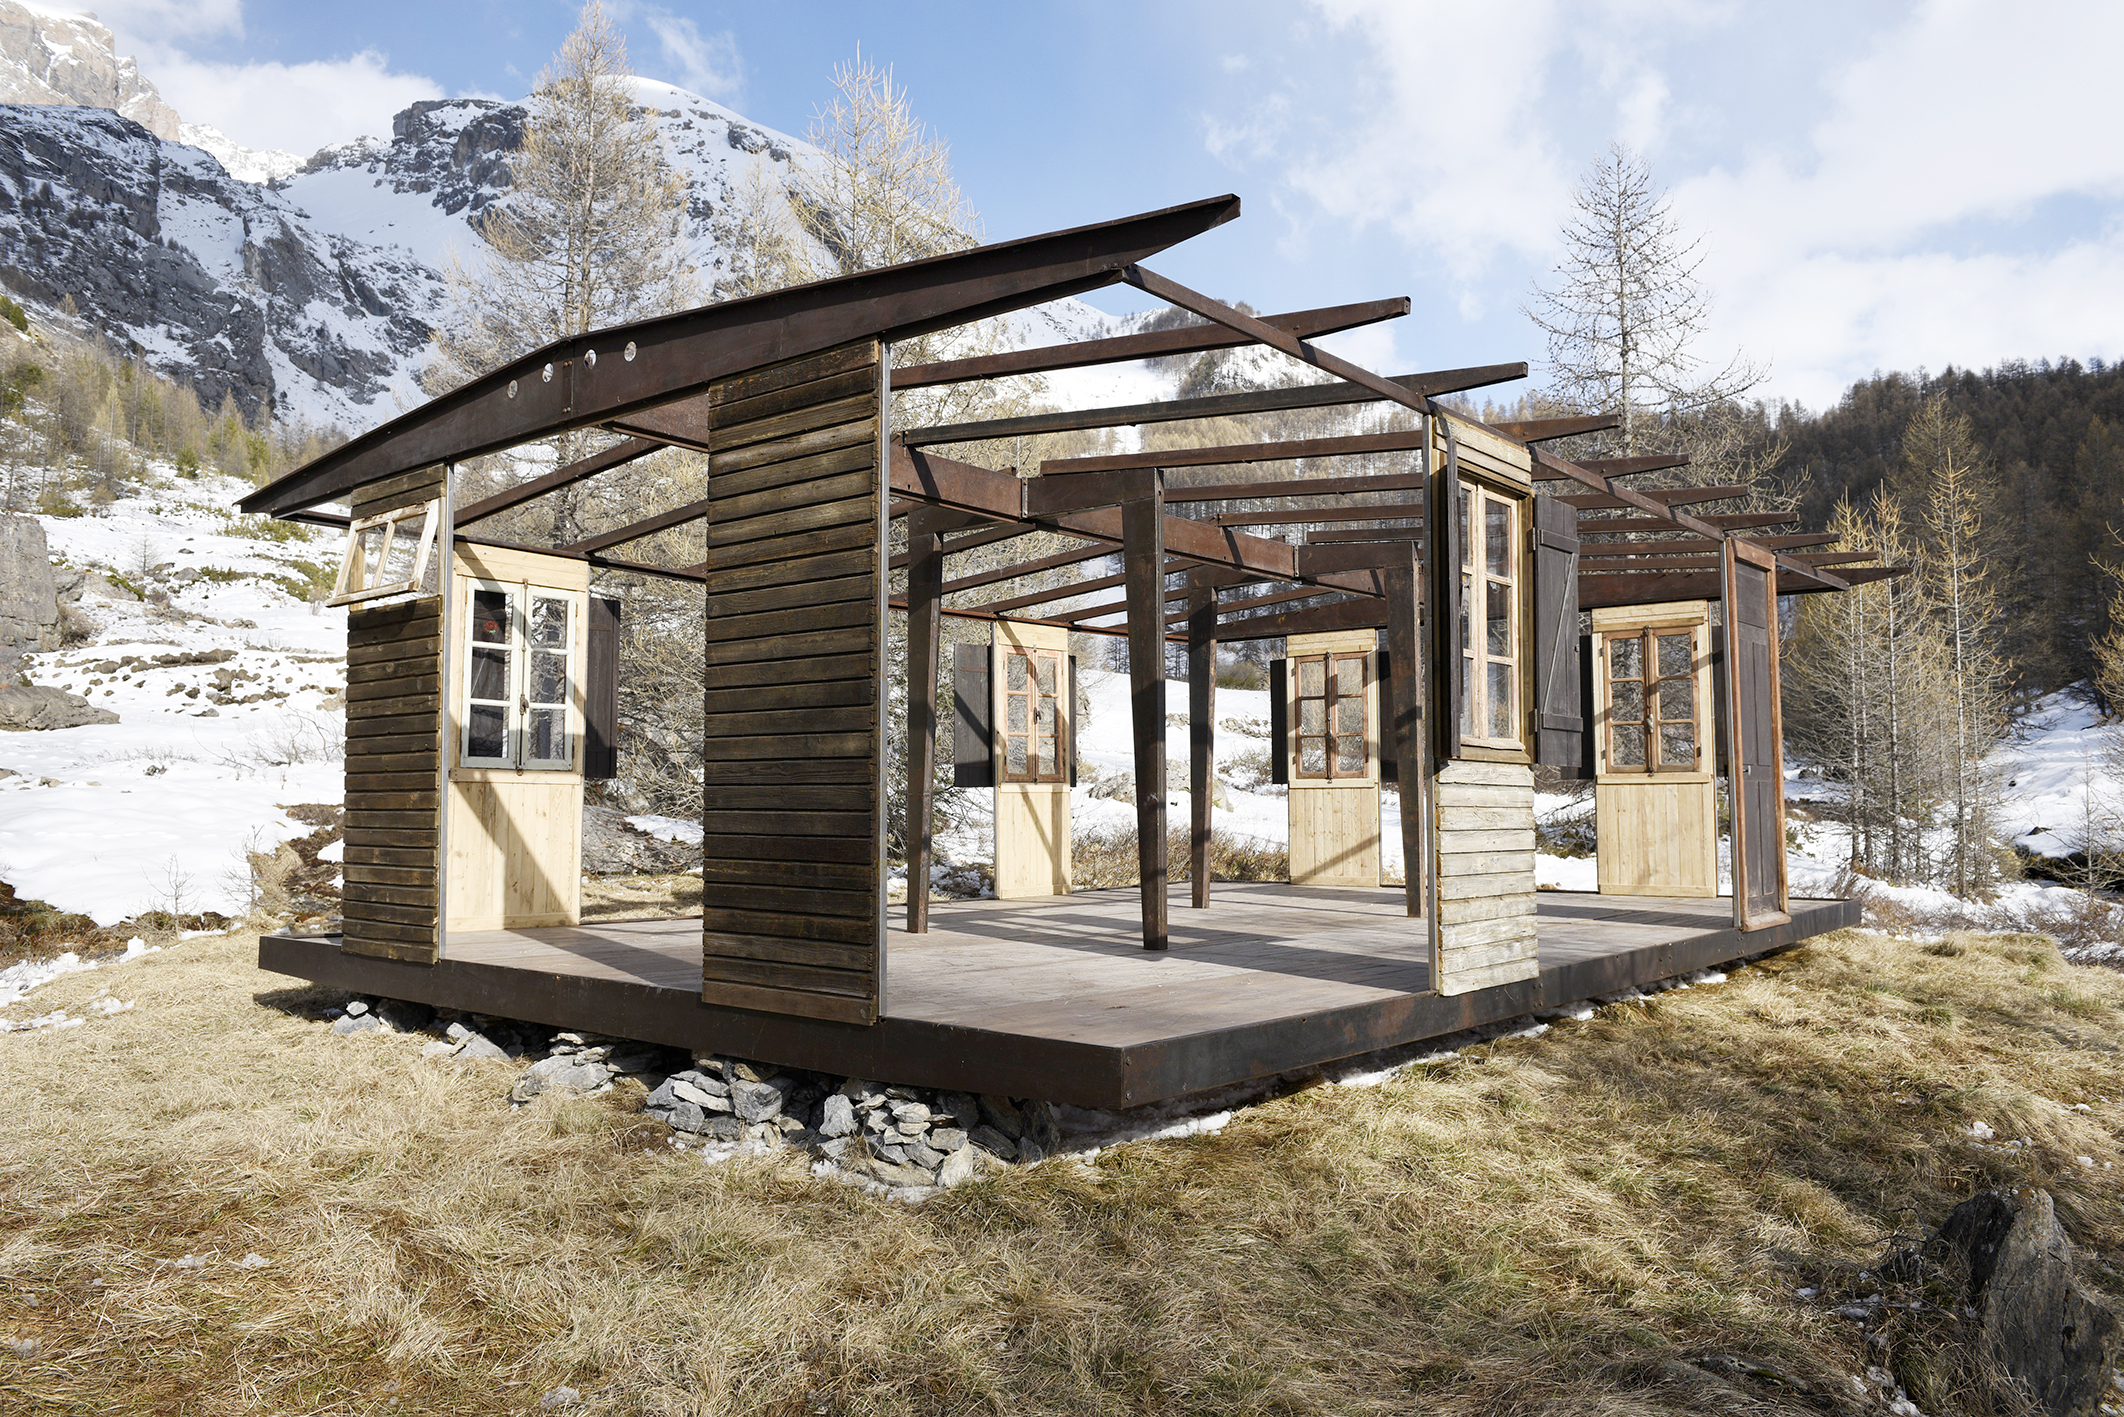 6x9 Demountable house, 1944. Reassembled in Fouillouse, Hautes-Alpes, 2017.